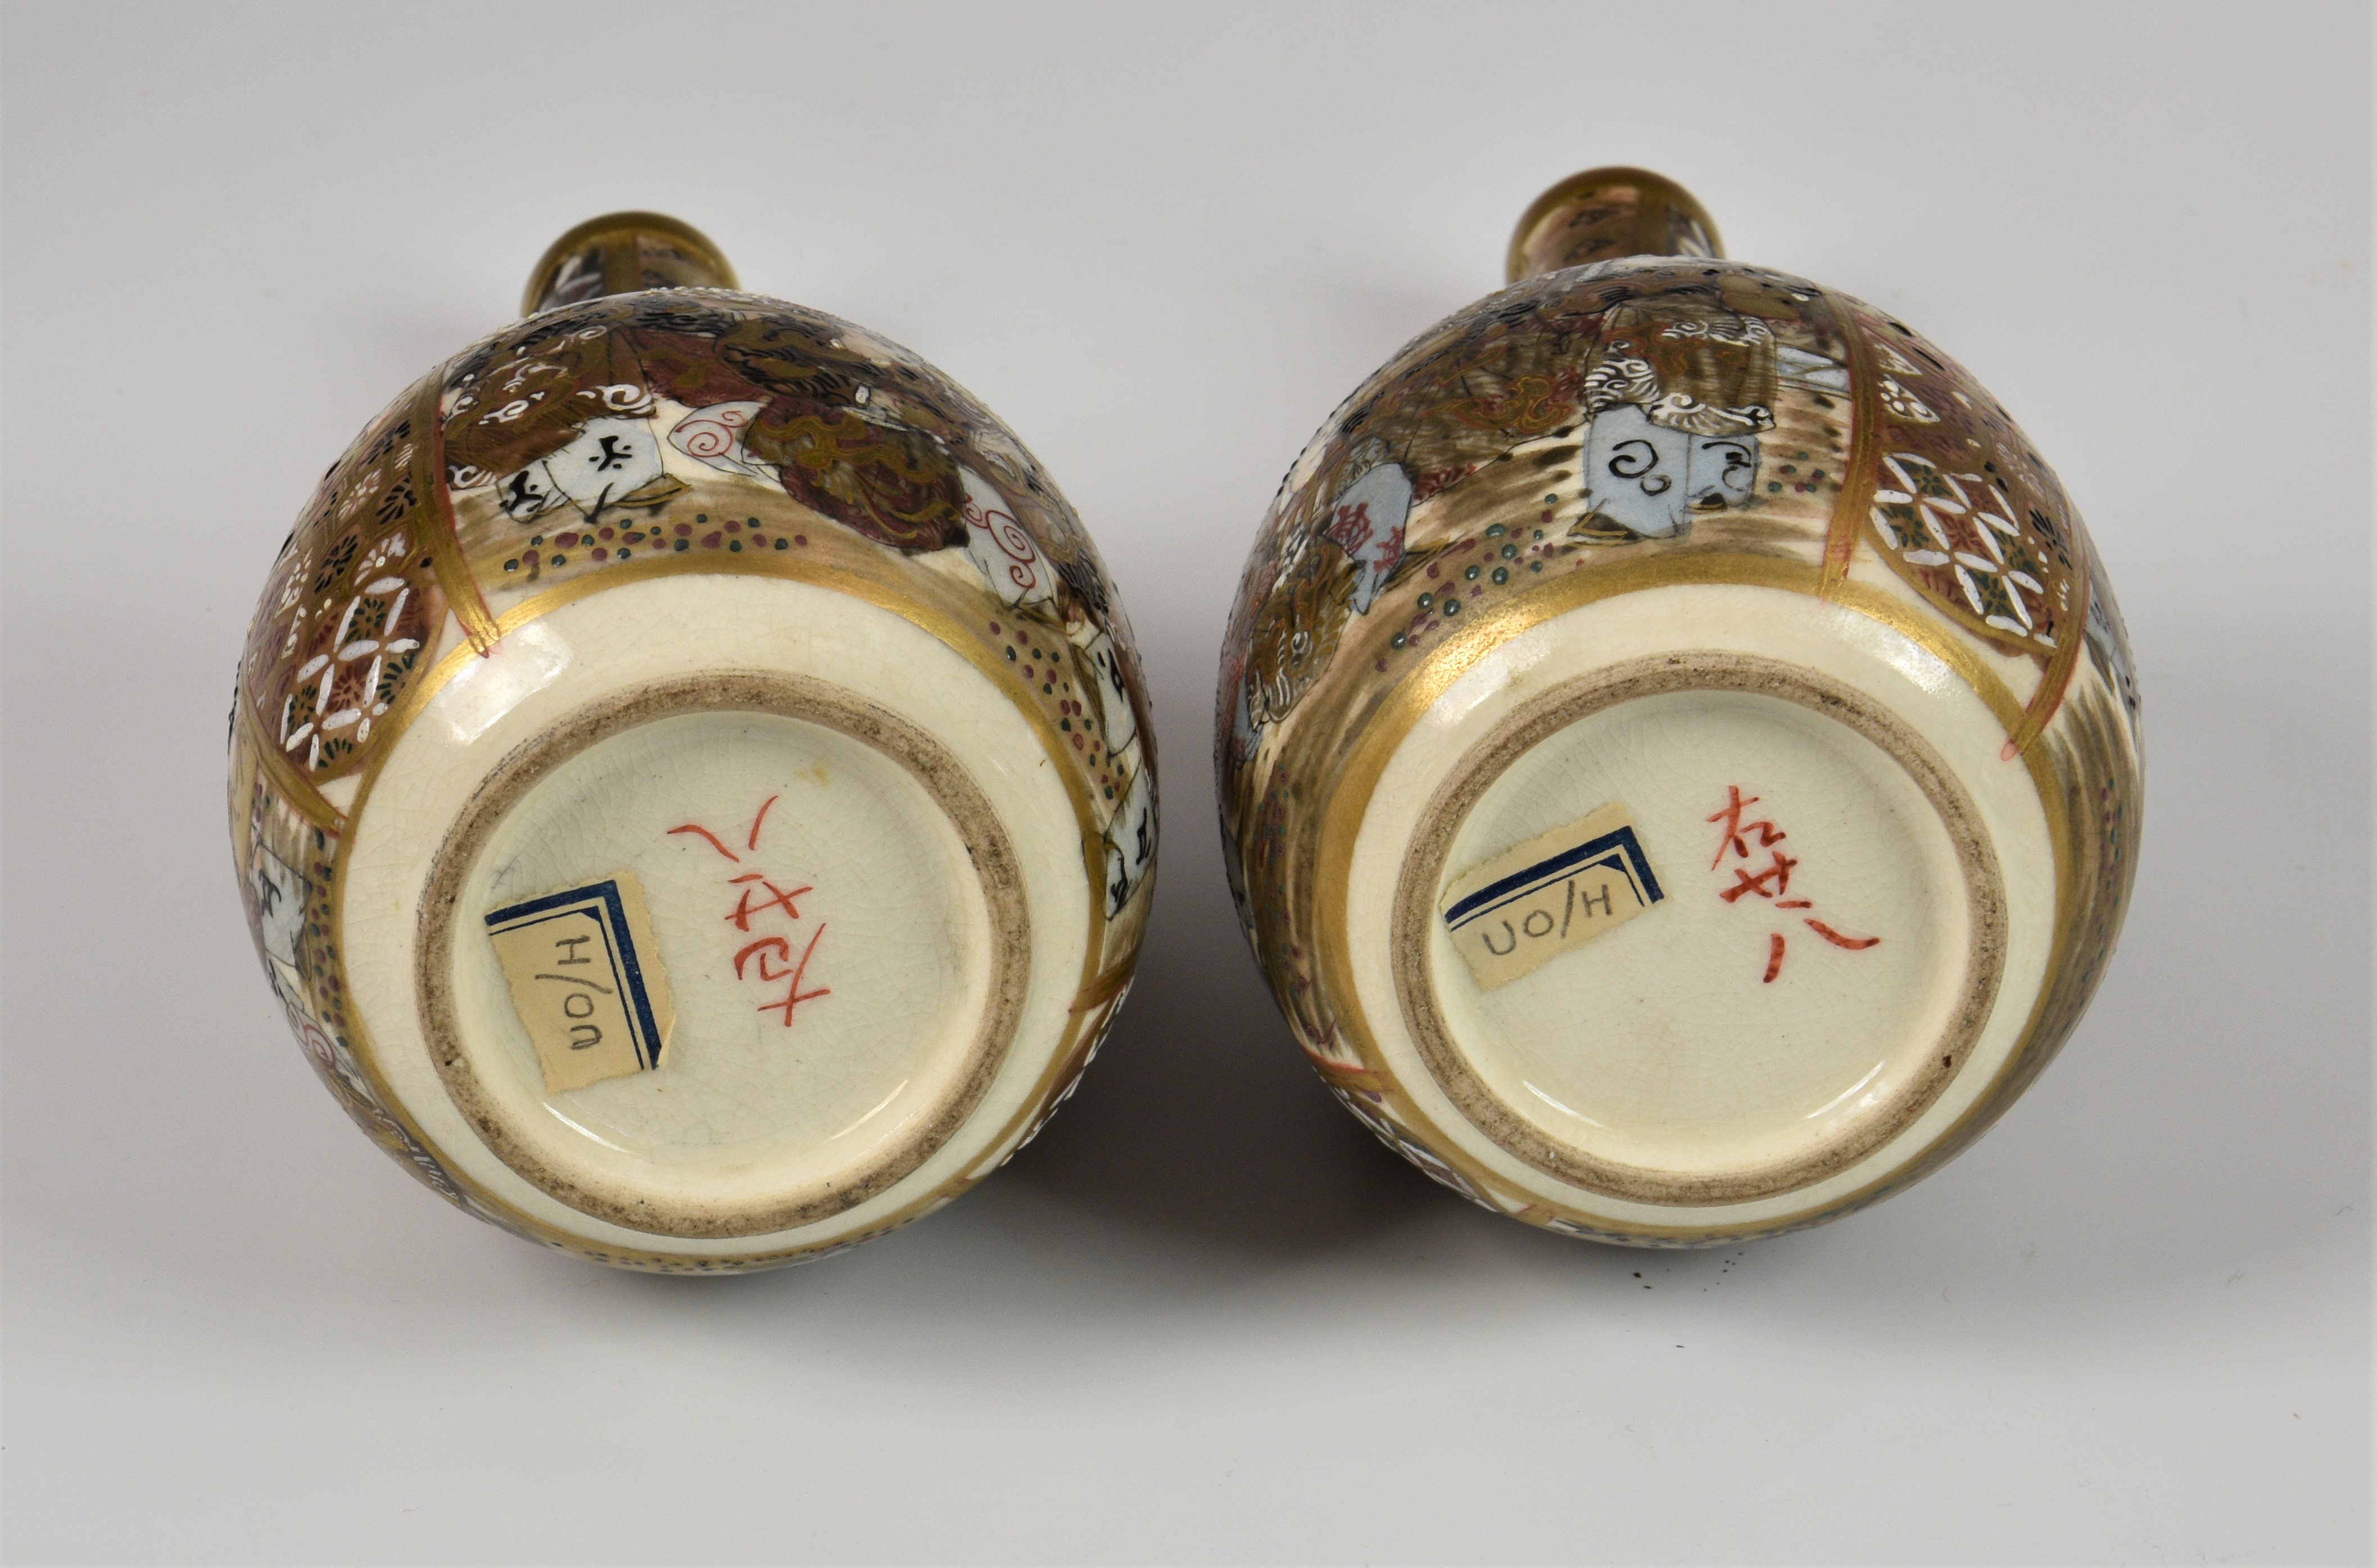 A collection of Japanese Satsuma ceramics, probably Meiji period (1868-1912), varying marks, to - Image 4 of 4